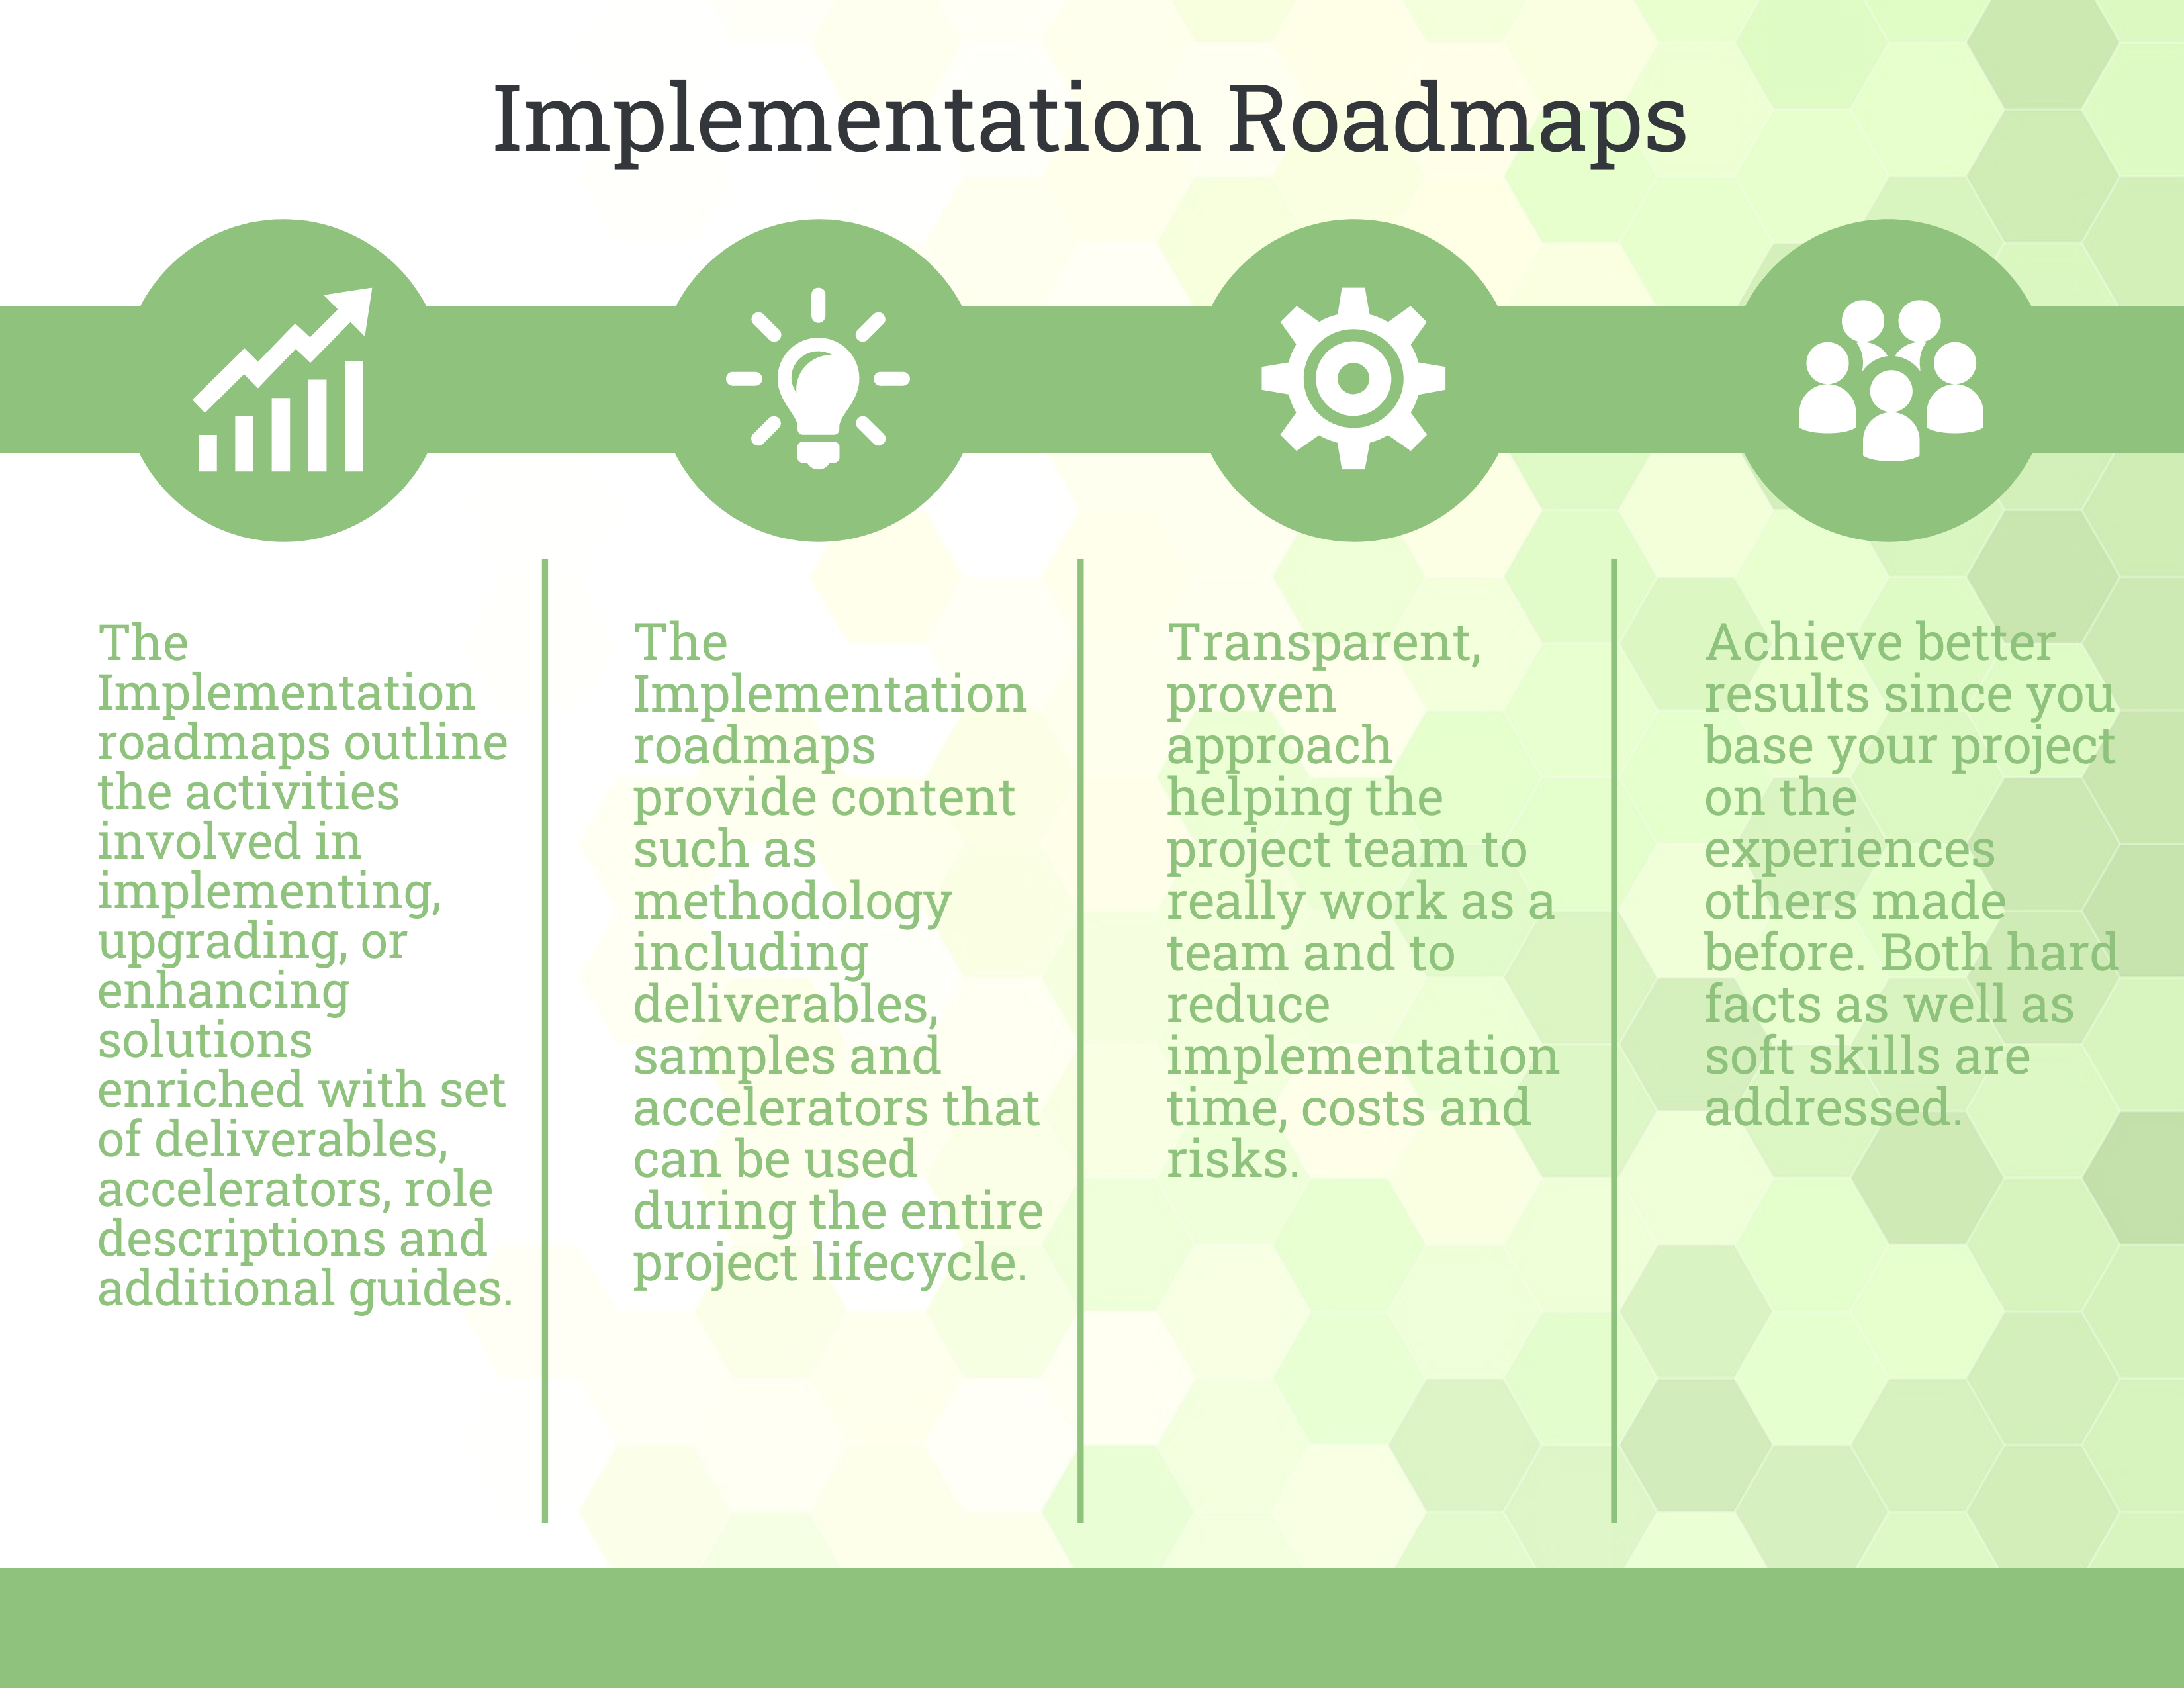 What are the Benefits of Implementation Roadmap